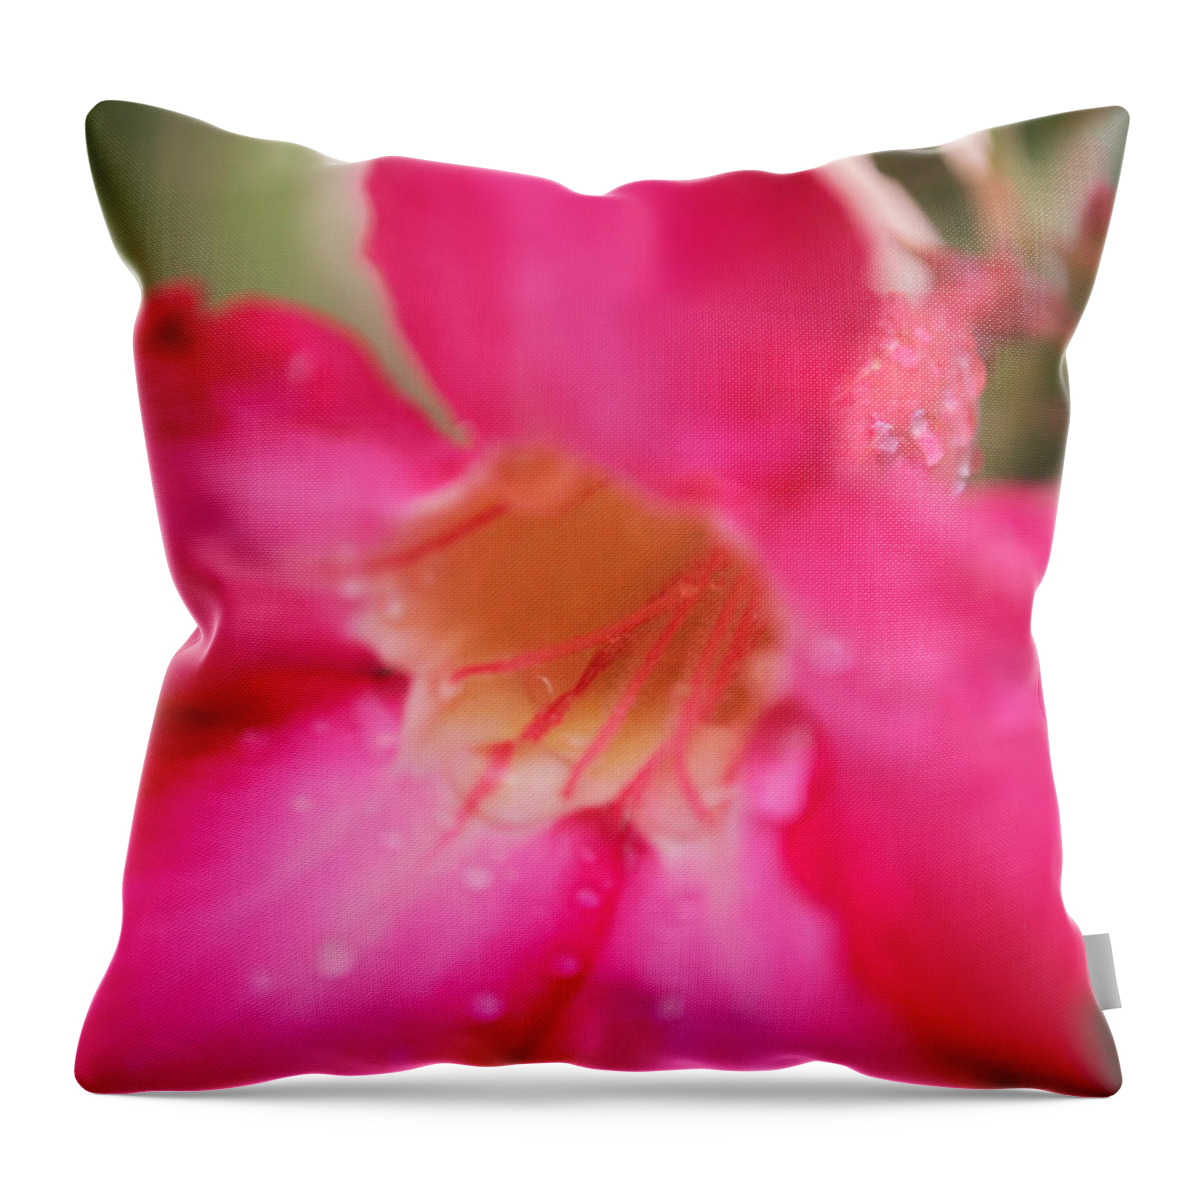 Tropic Throw Pillow featuring the photograph Rain Season by Miguel Winterpacht